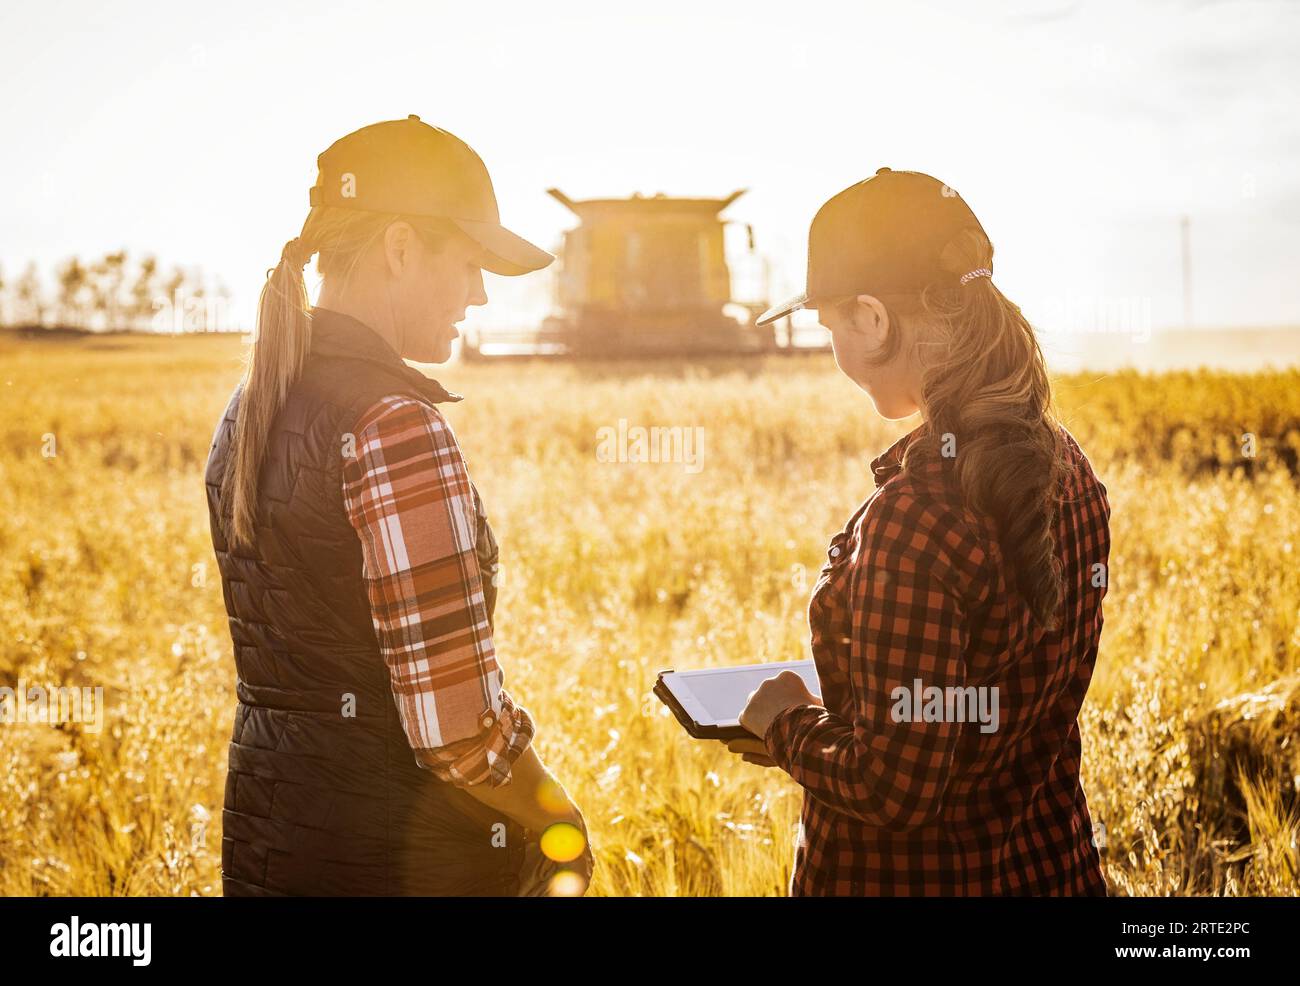 Close-up view taken from behind of a mature farm woman standing in a field working together with a young woman at harvest time, using advanced agri... Stock Photo